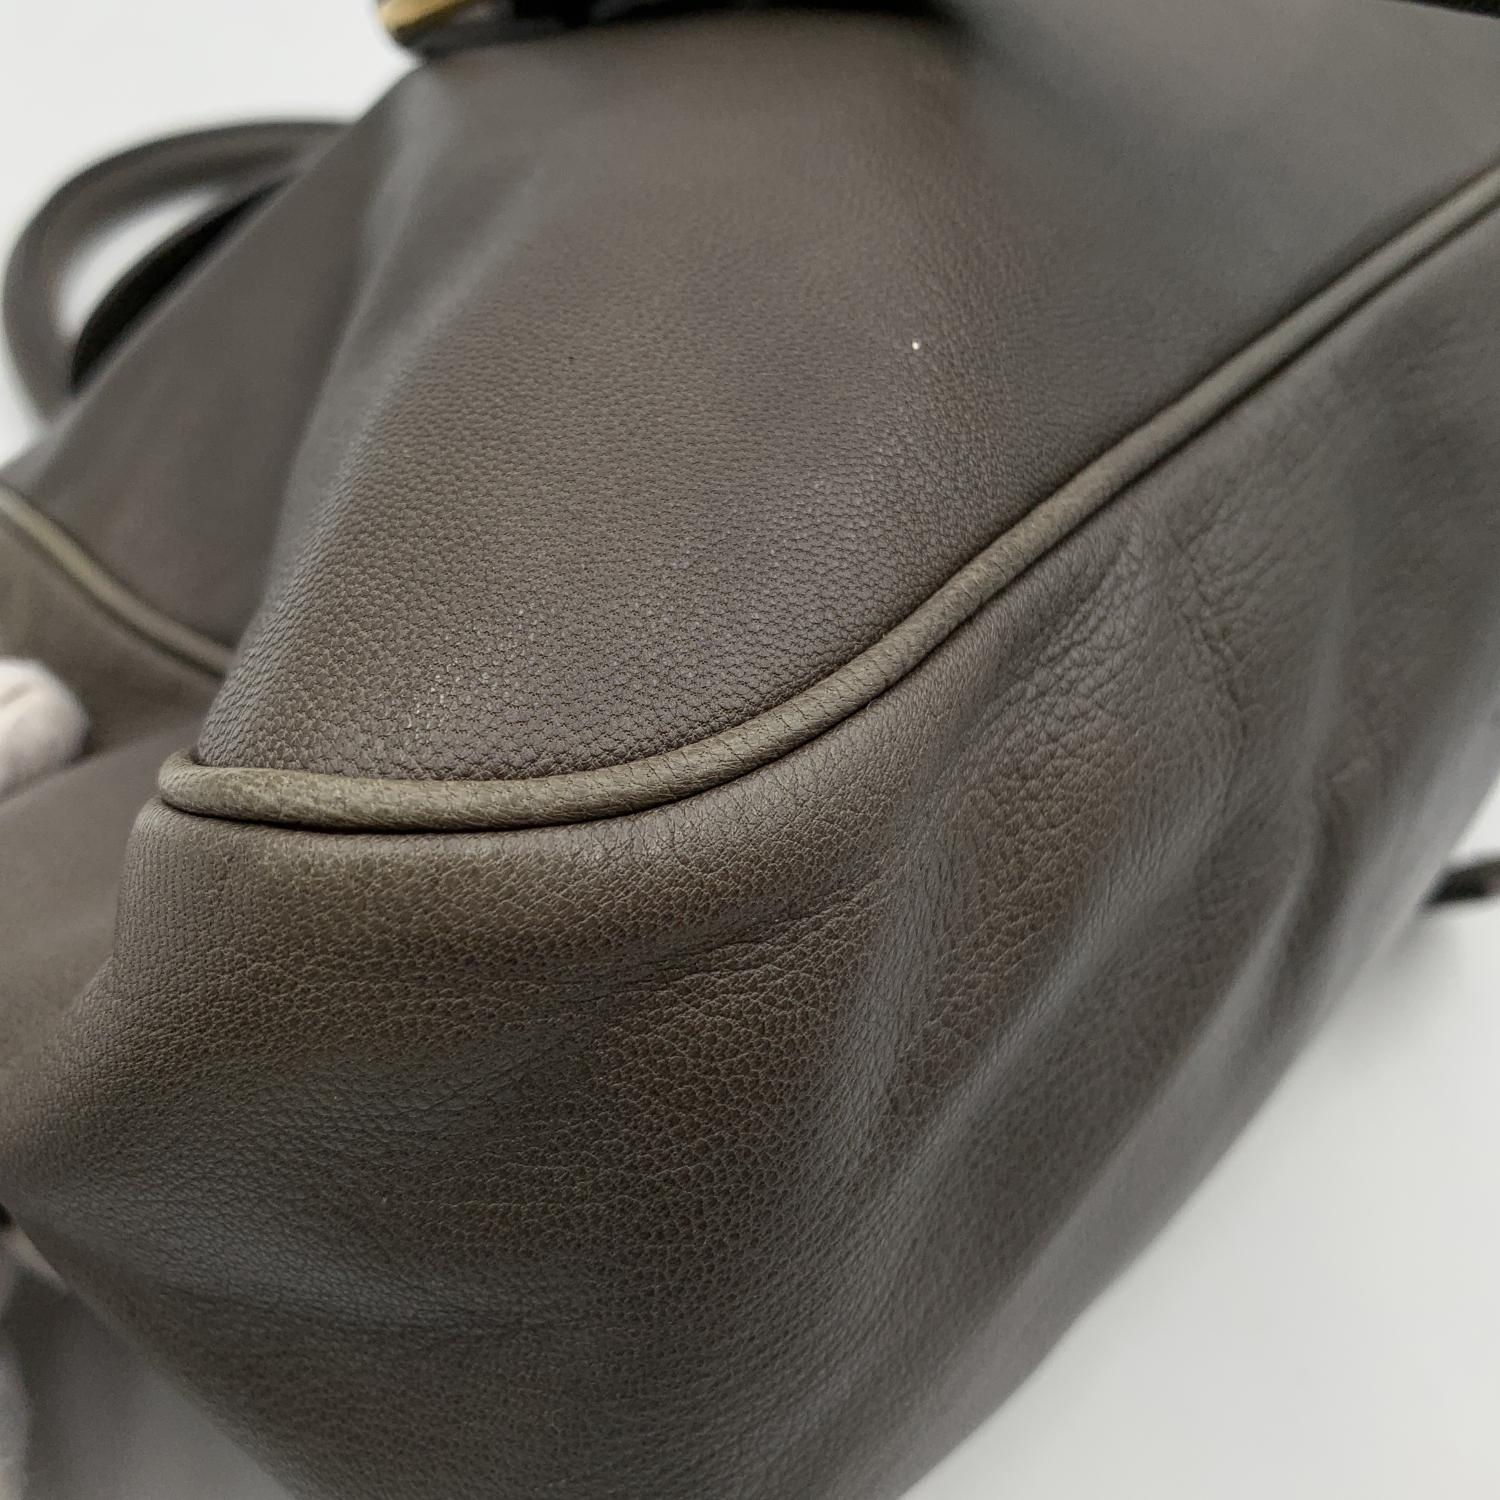 Yves Saint Laurent Grey Taupe Leather Muse Bowler Satchel Bag 6